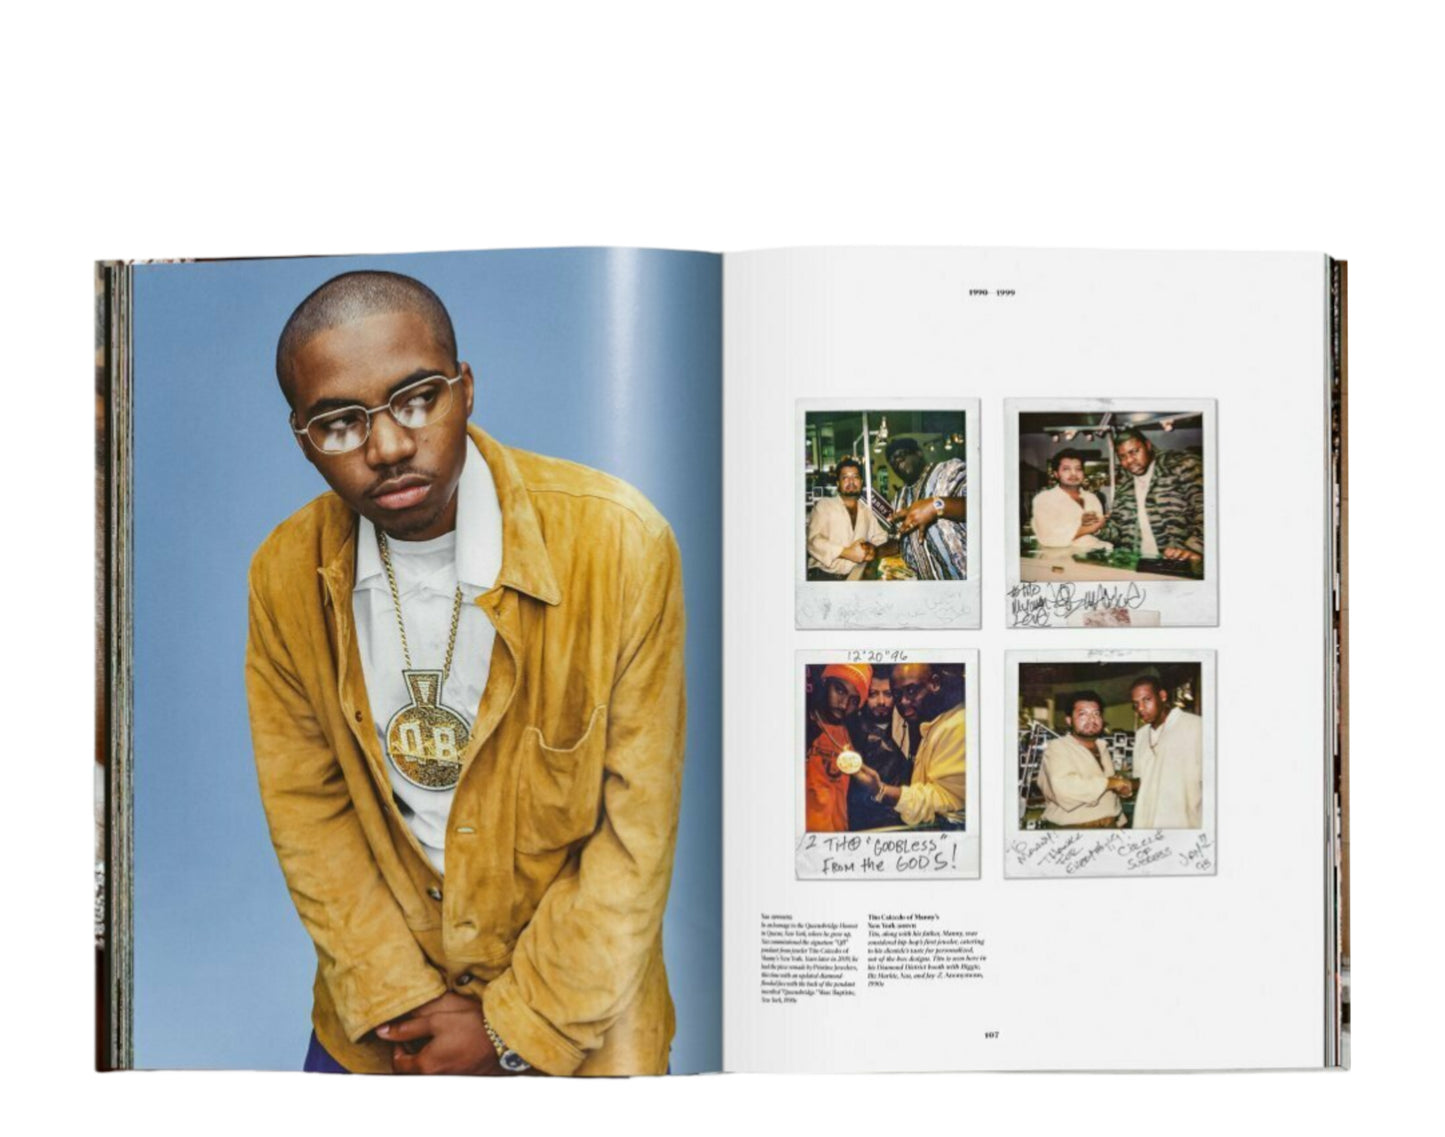 Taschen Books - Ice Cold. A Hip-Hop Jewelry History Hard Cover Book